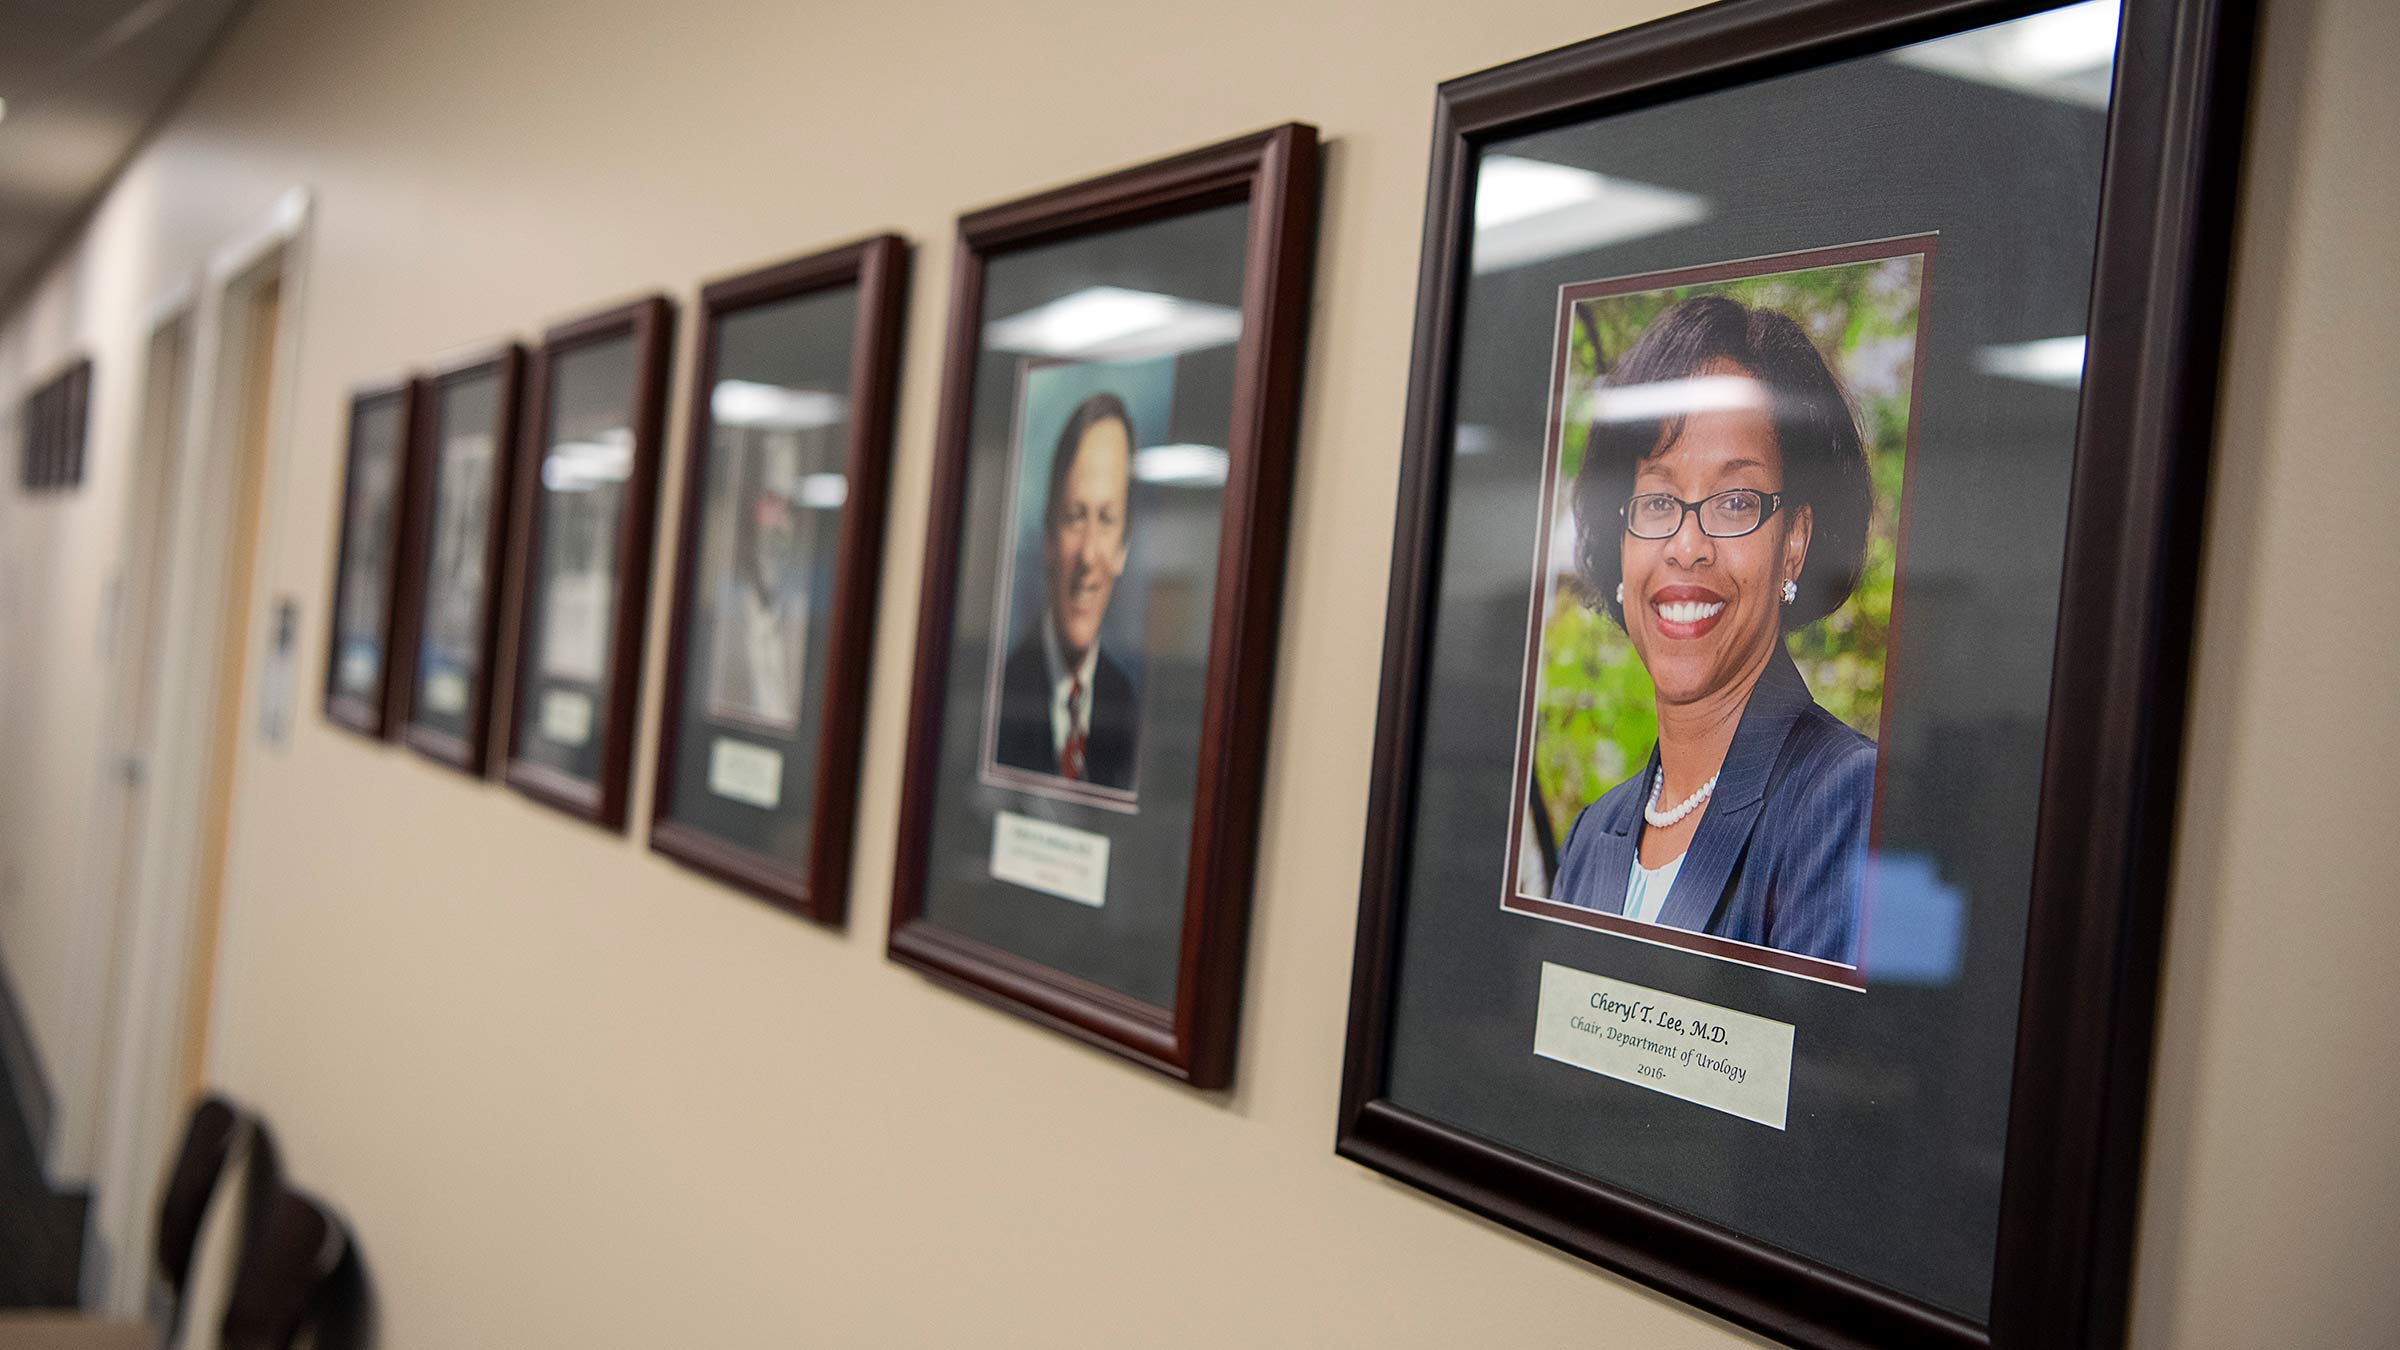 Portraits of the past leaders of the Urology department hung on a wall